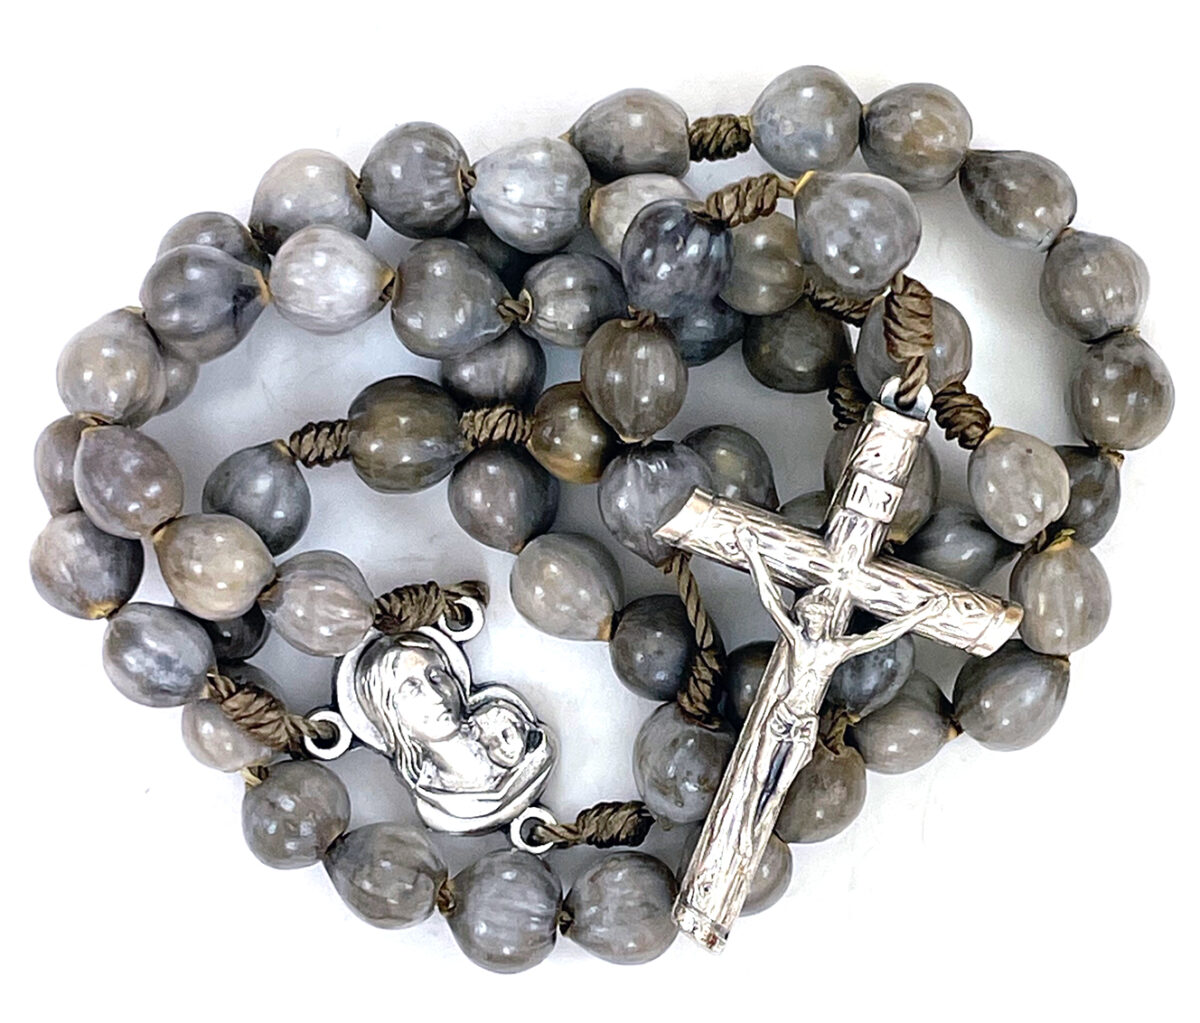 Blessed Mother Job’s Tears Rosary ($17.99)